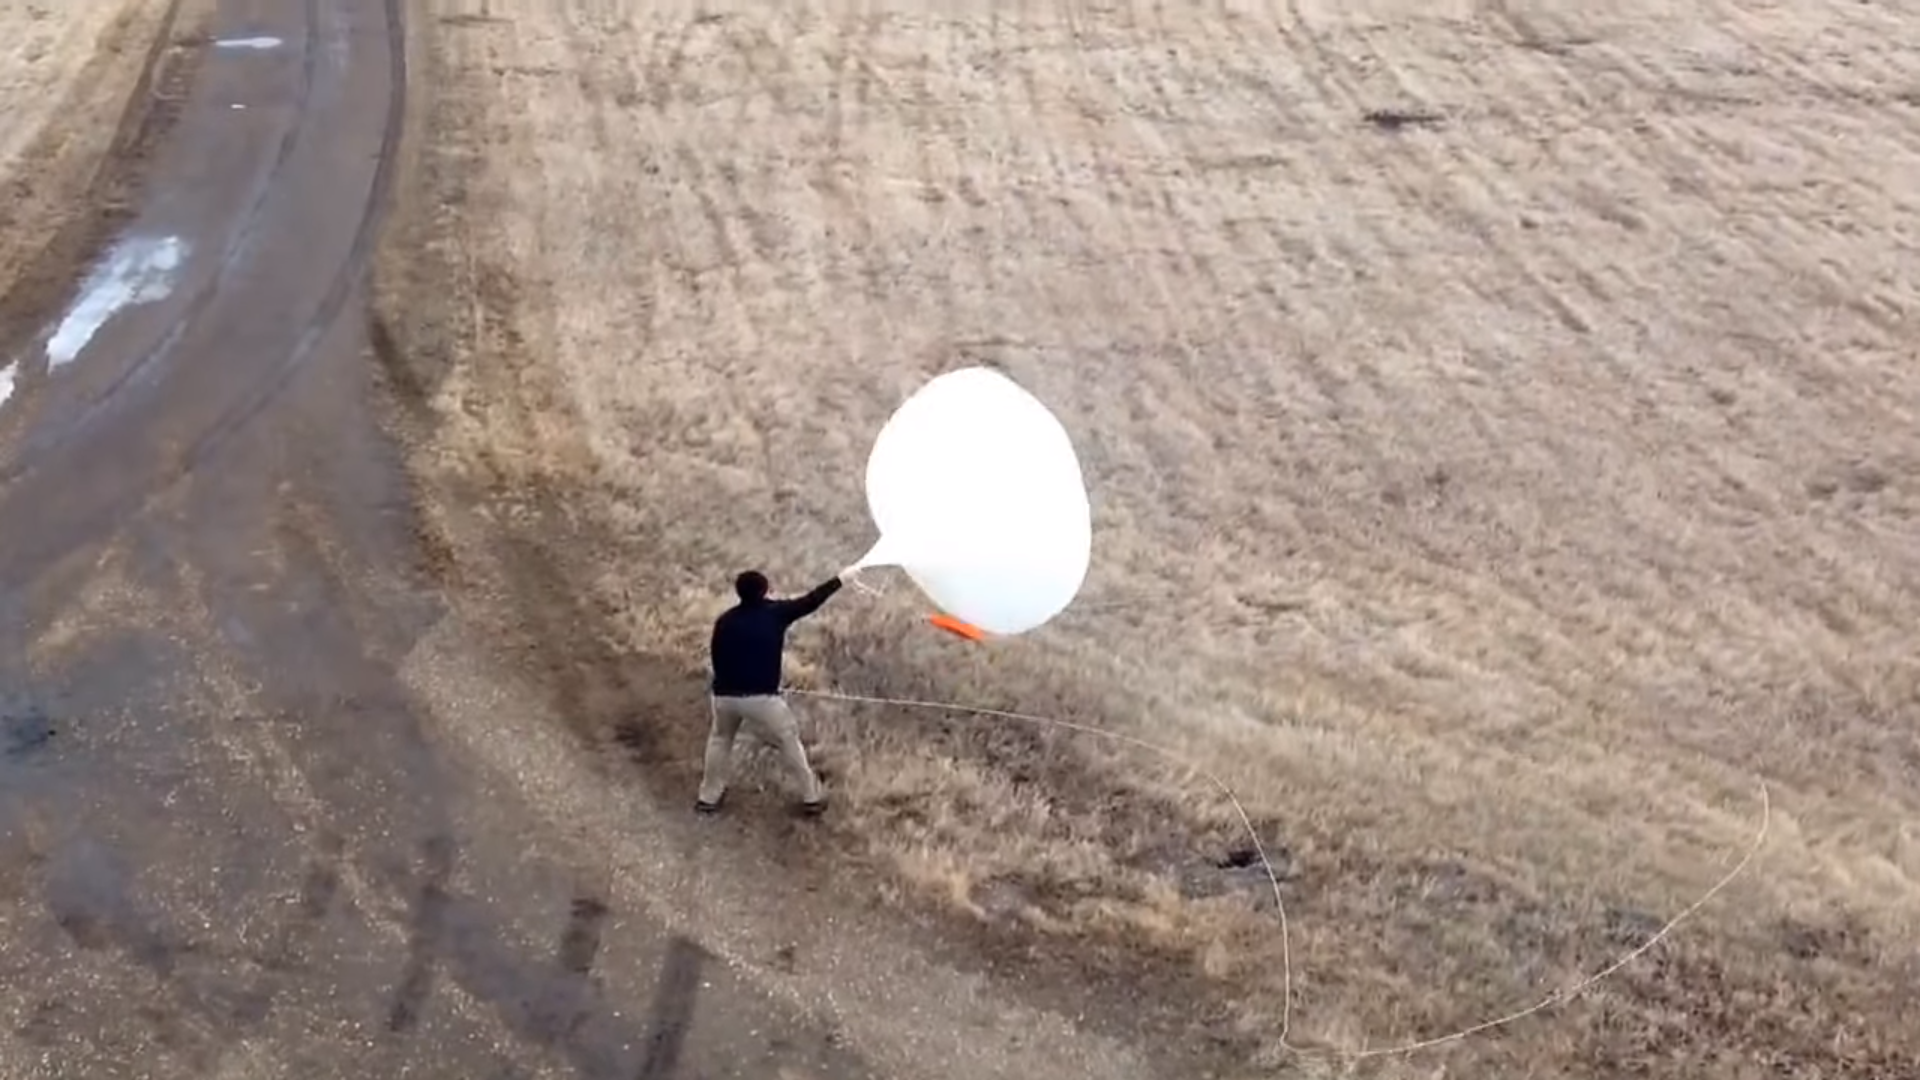 In very windy conditions, Forecaster Michael Matthews launches a weather balloon from the Weather Forecast Office in Bismarck, North Dakota. 